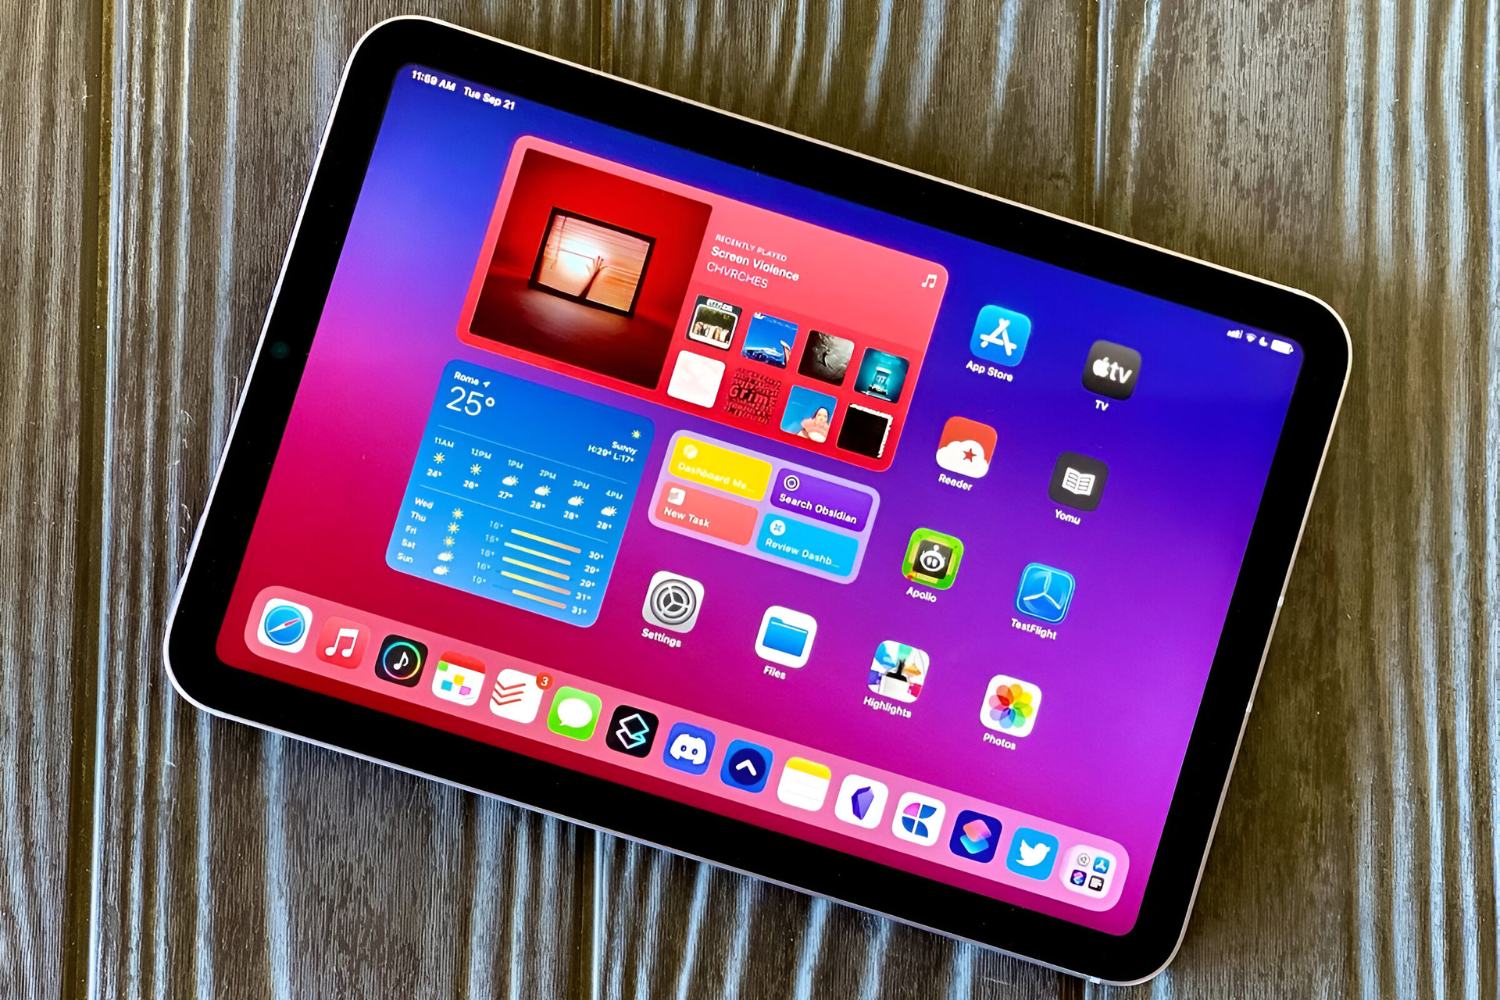 Disabling Personal Hotspot On IPad: Easy Instructions